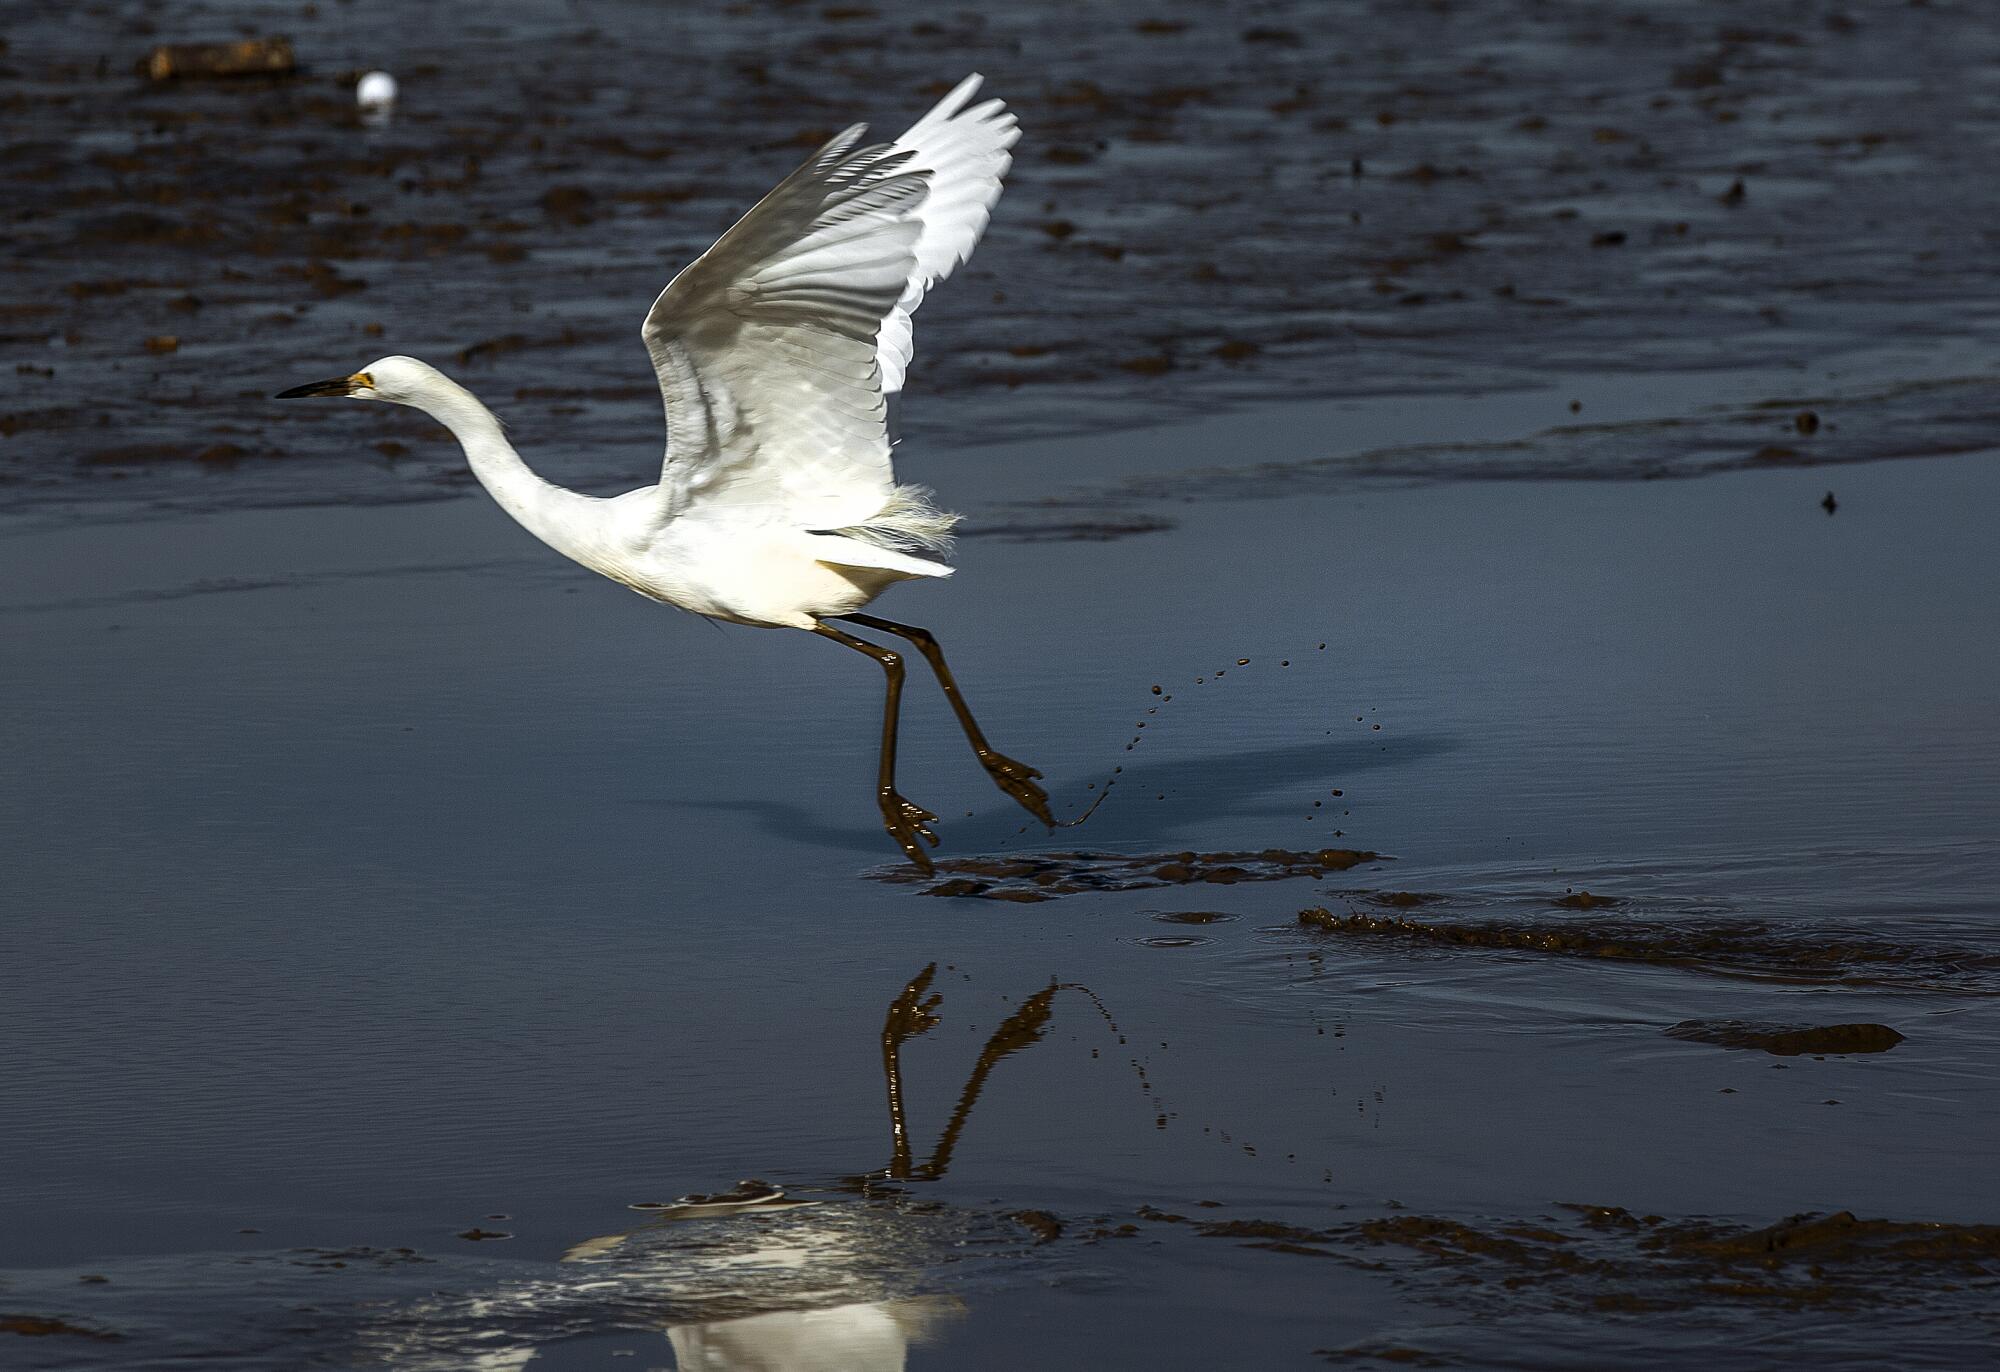 An egret takes flight over muddy water.